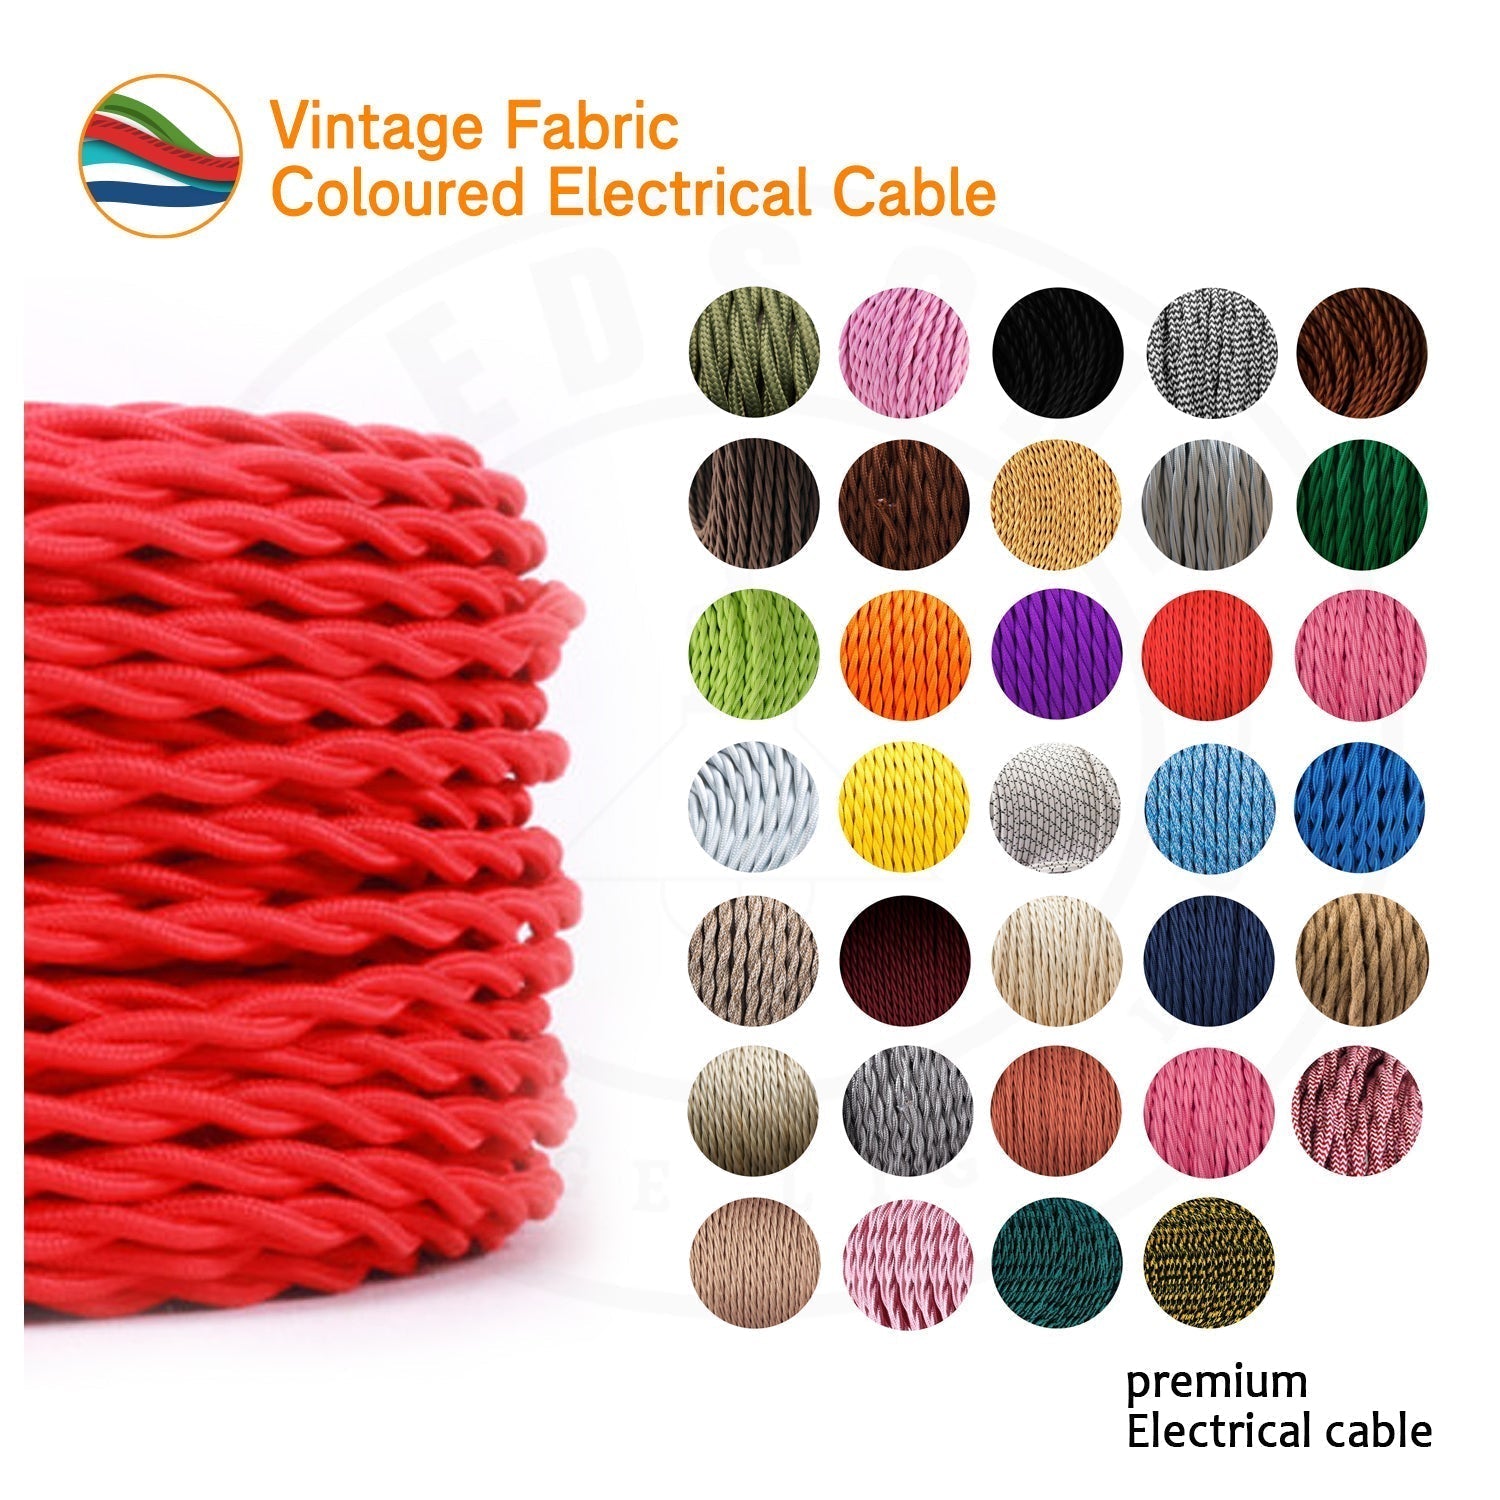 10m 3 Core Twisted Metallic Silver Vintage Electric Fabric Cable Flex